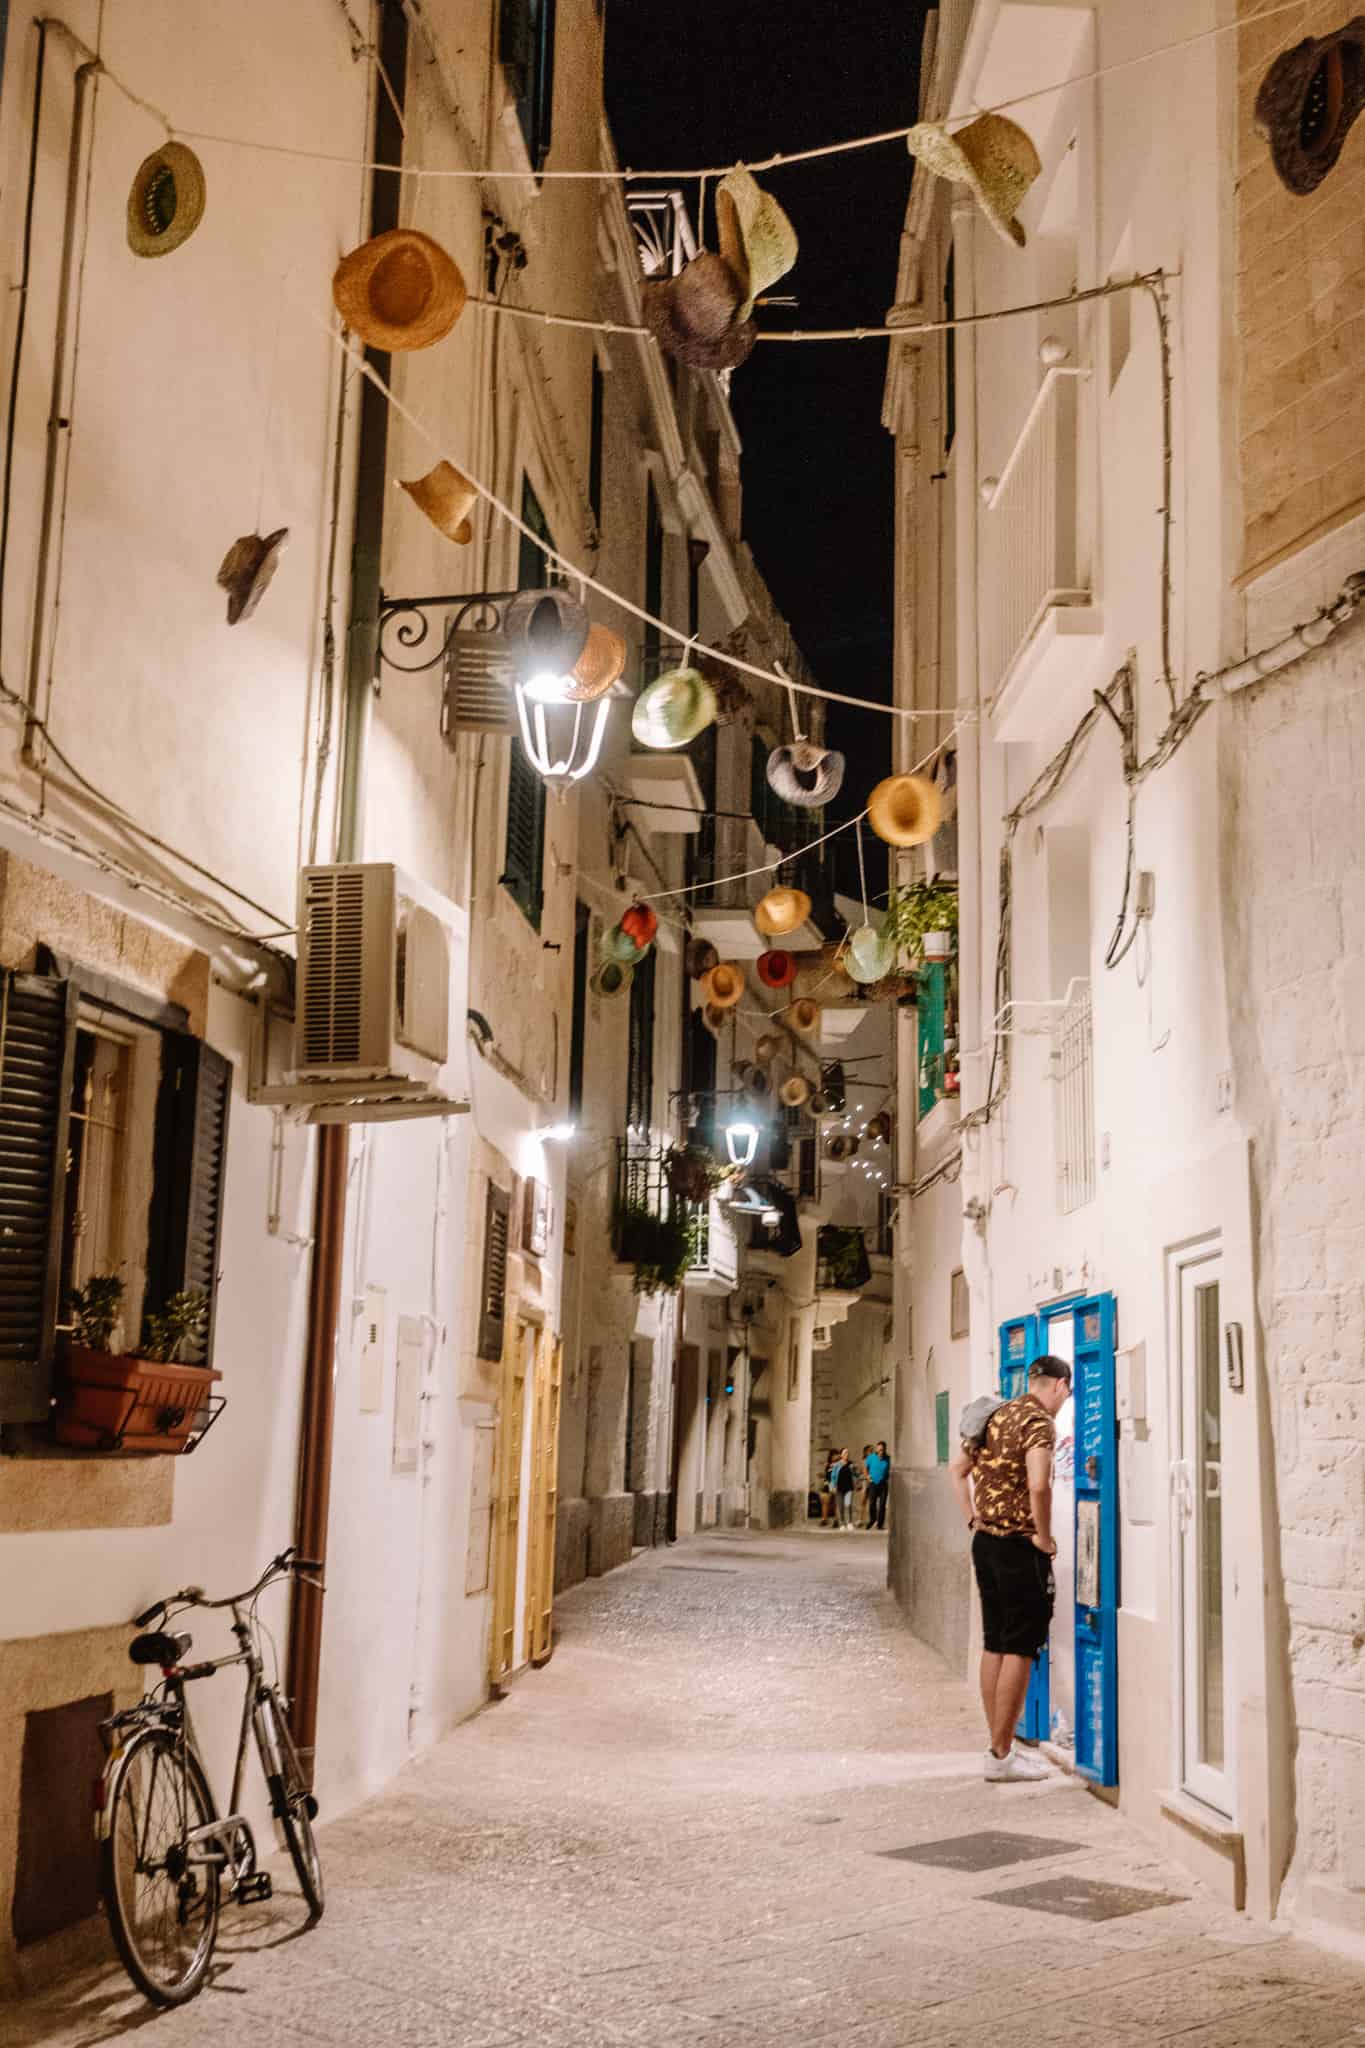 Alleyway in Monopoli with Hat Garland